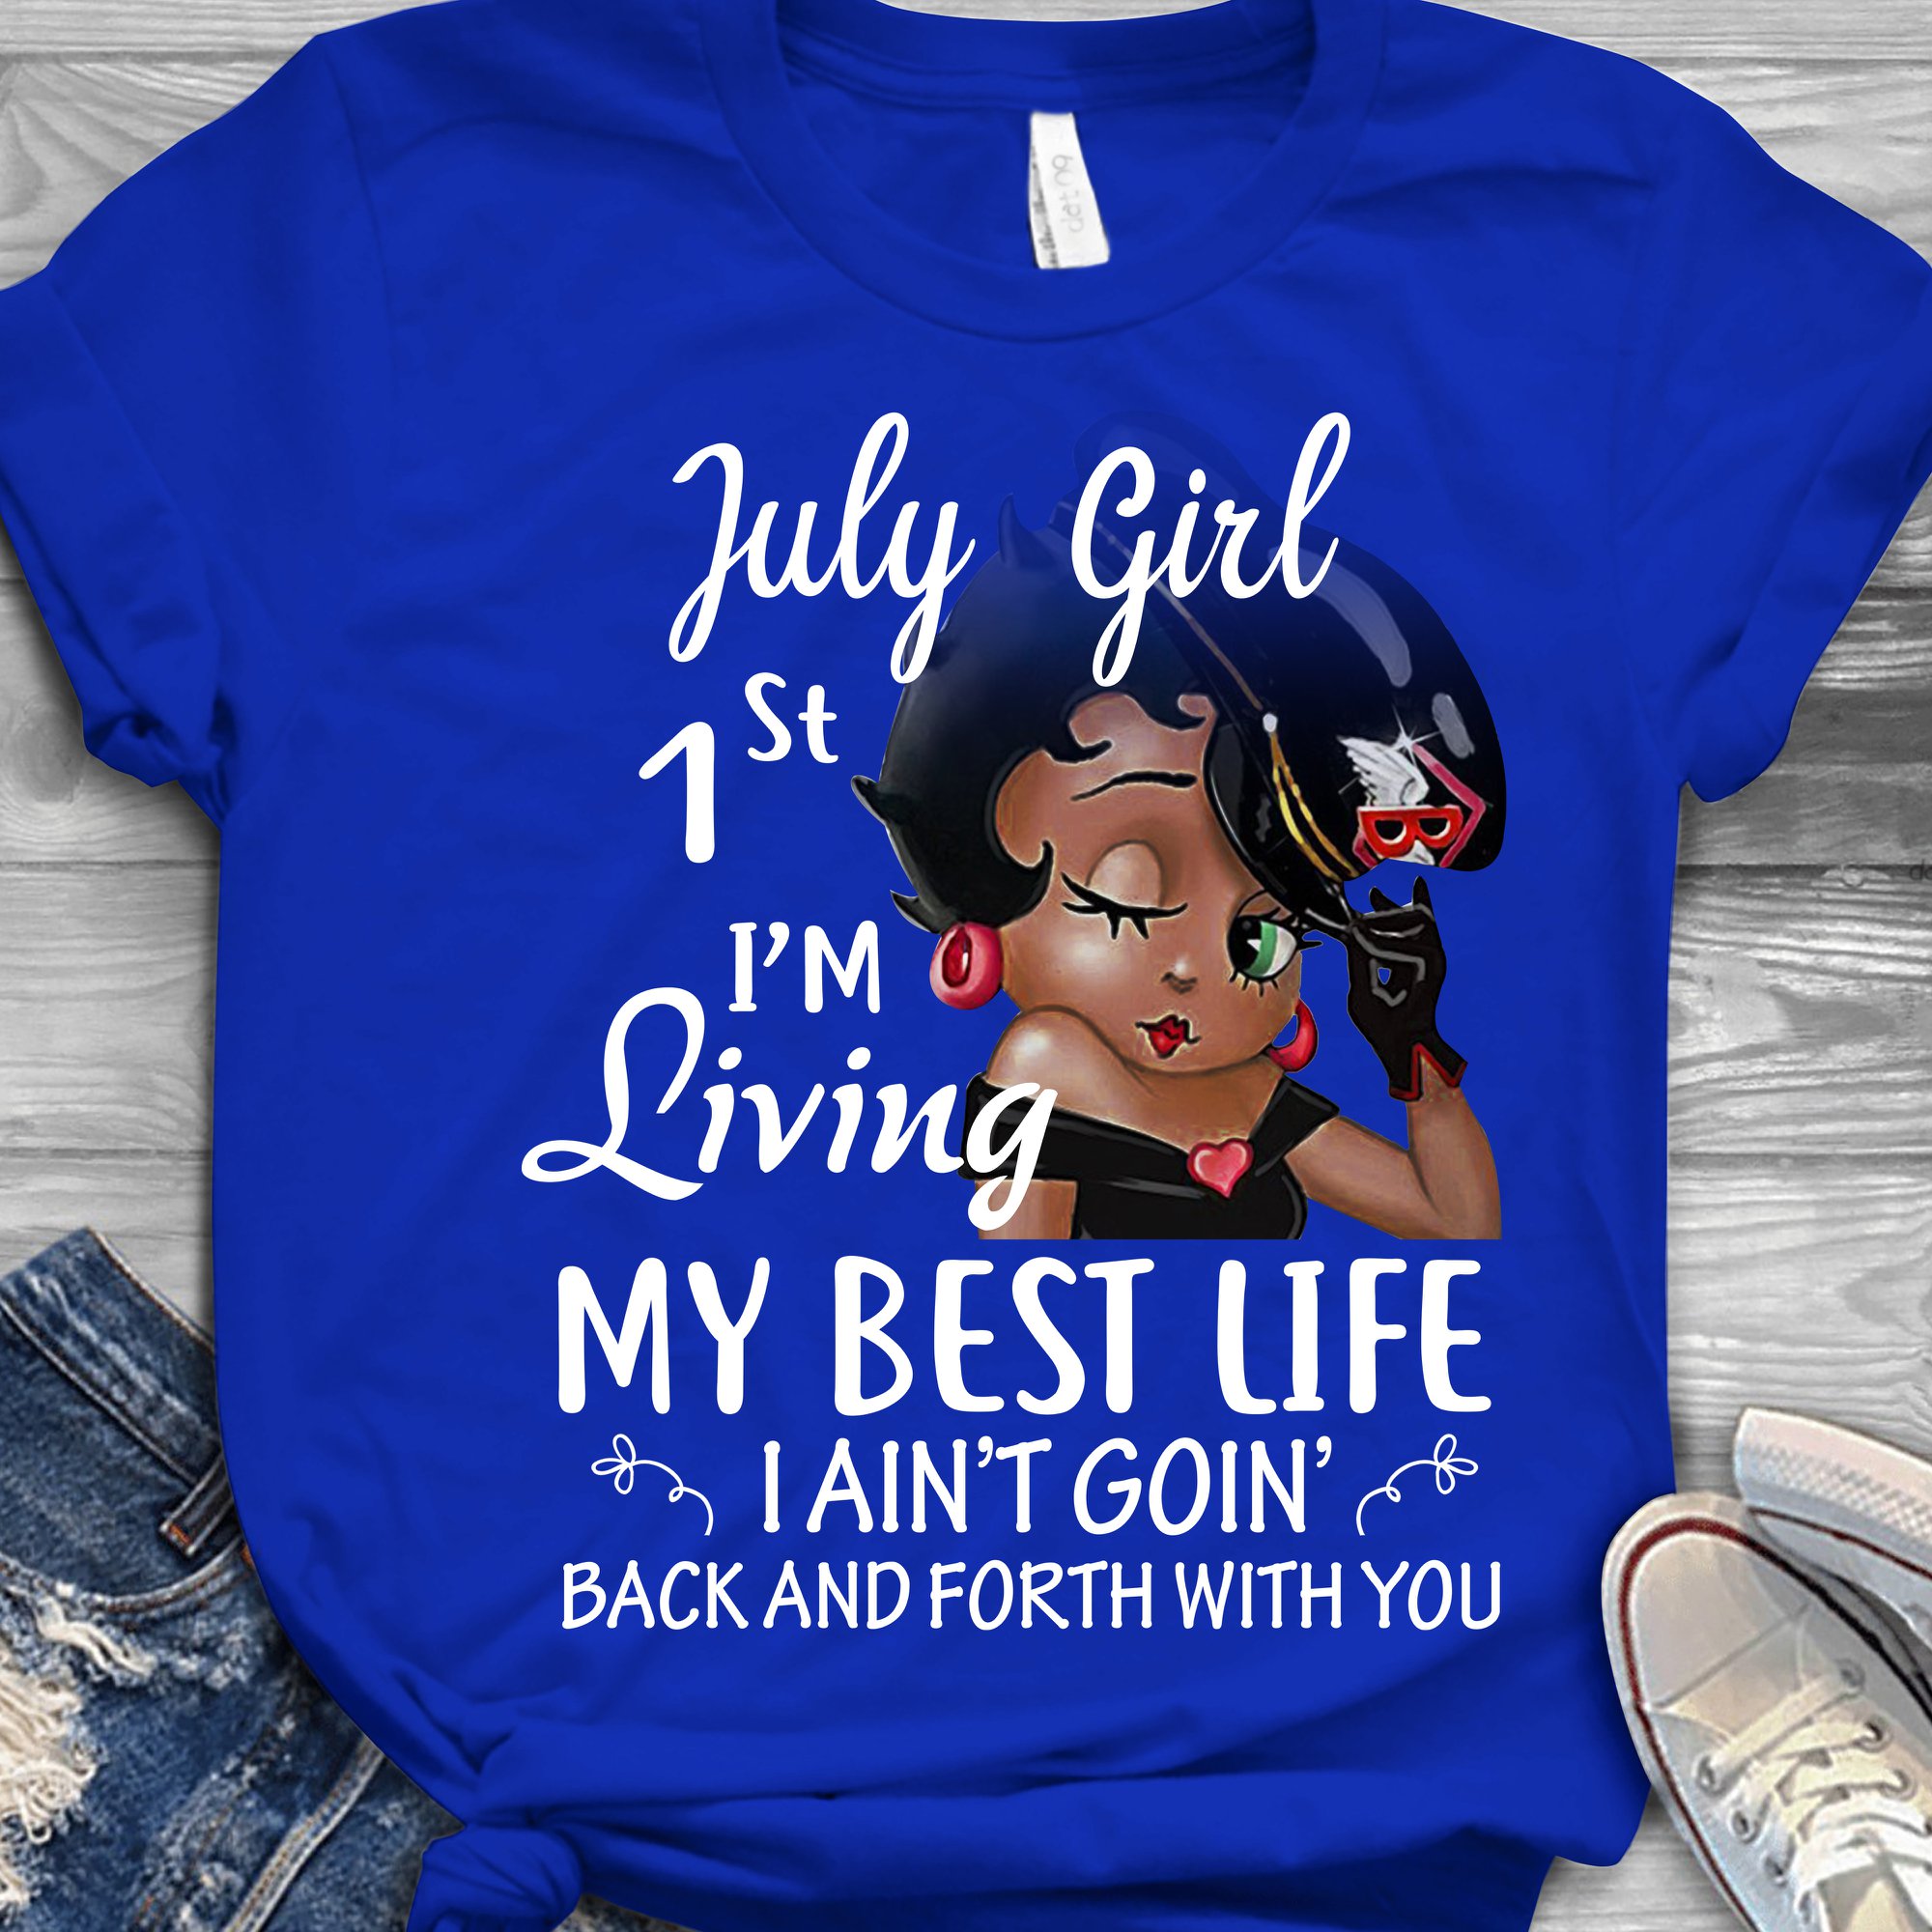 July girl 1st Im living my best I aint goin back and forth with you